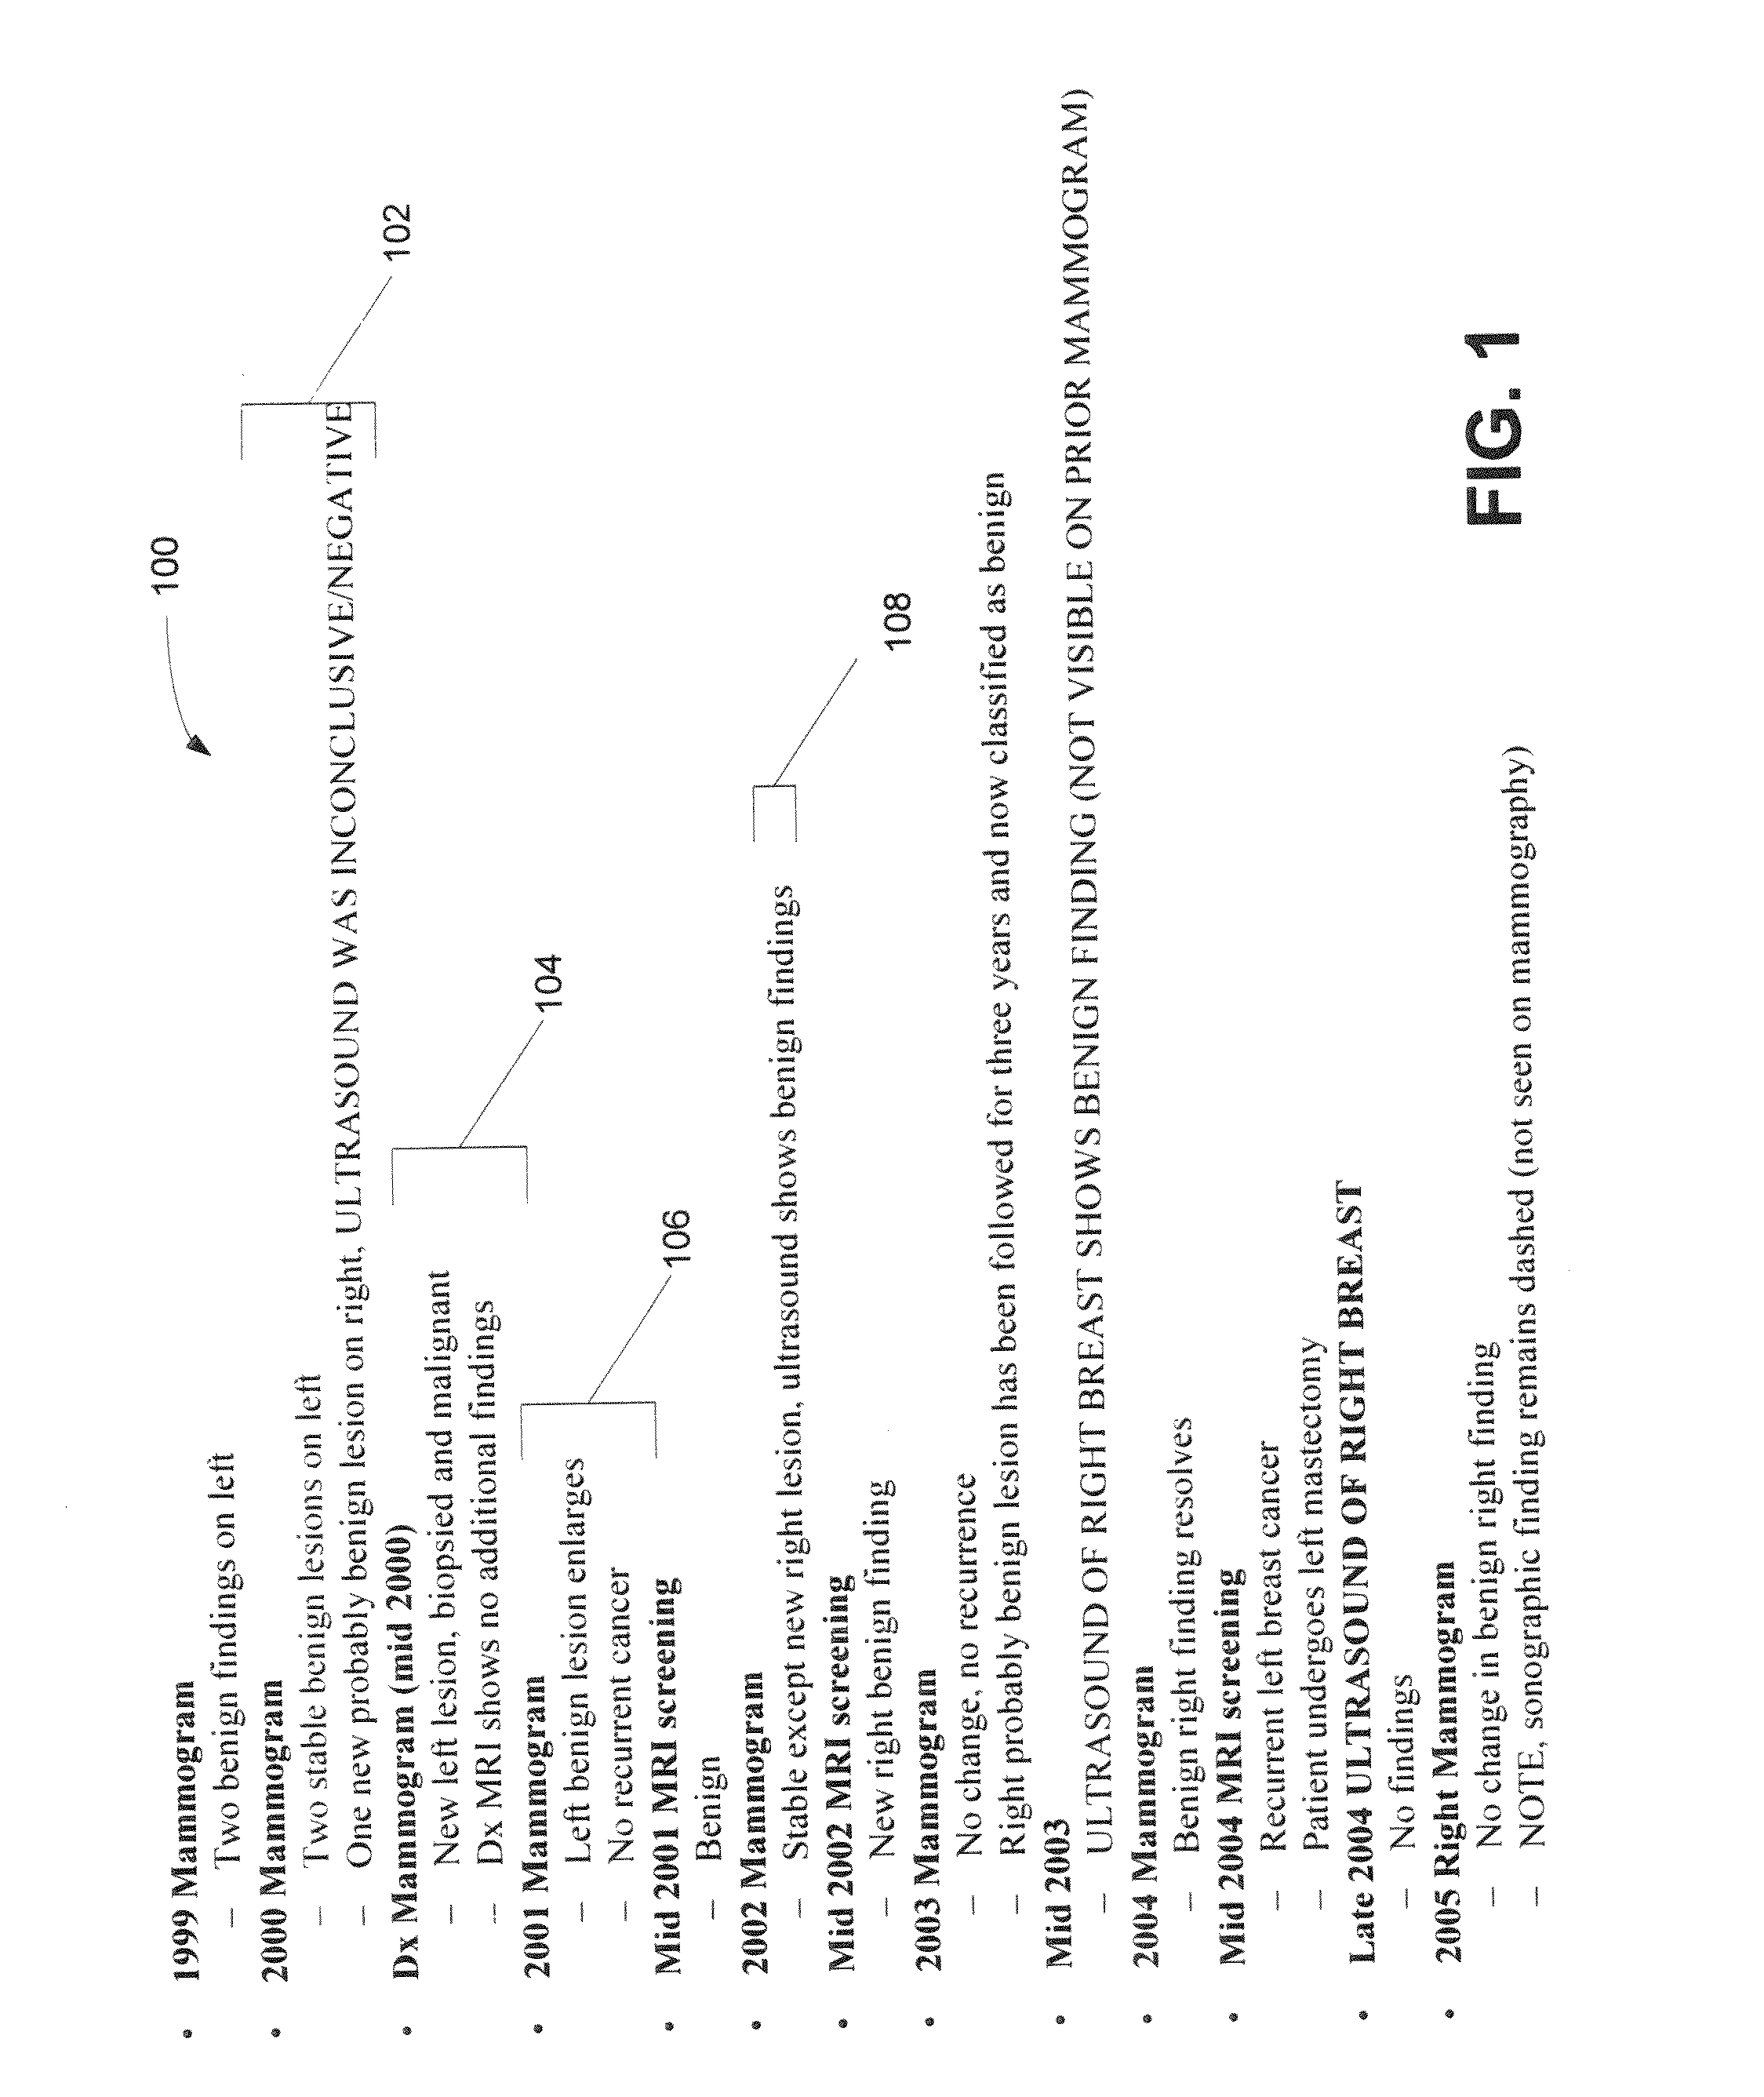 System and method for the graphical presentation of the content of radiologic image study reports